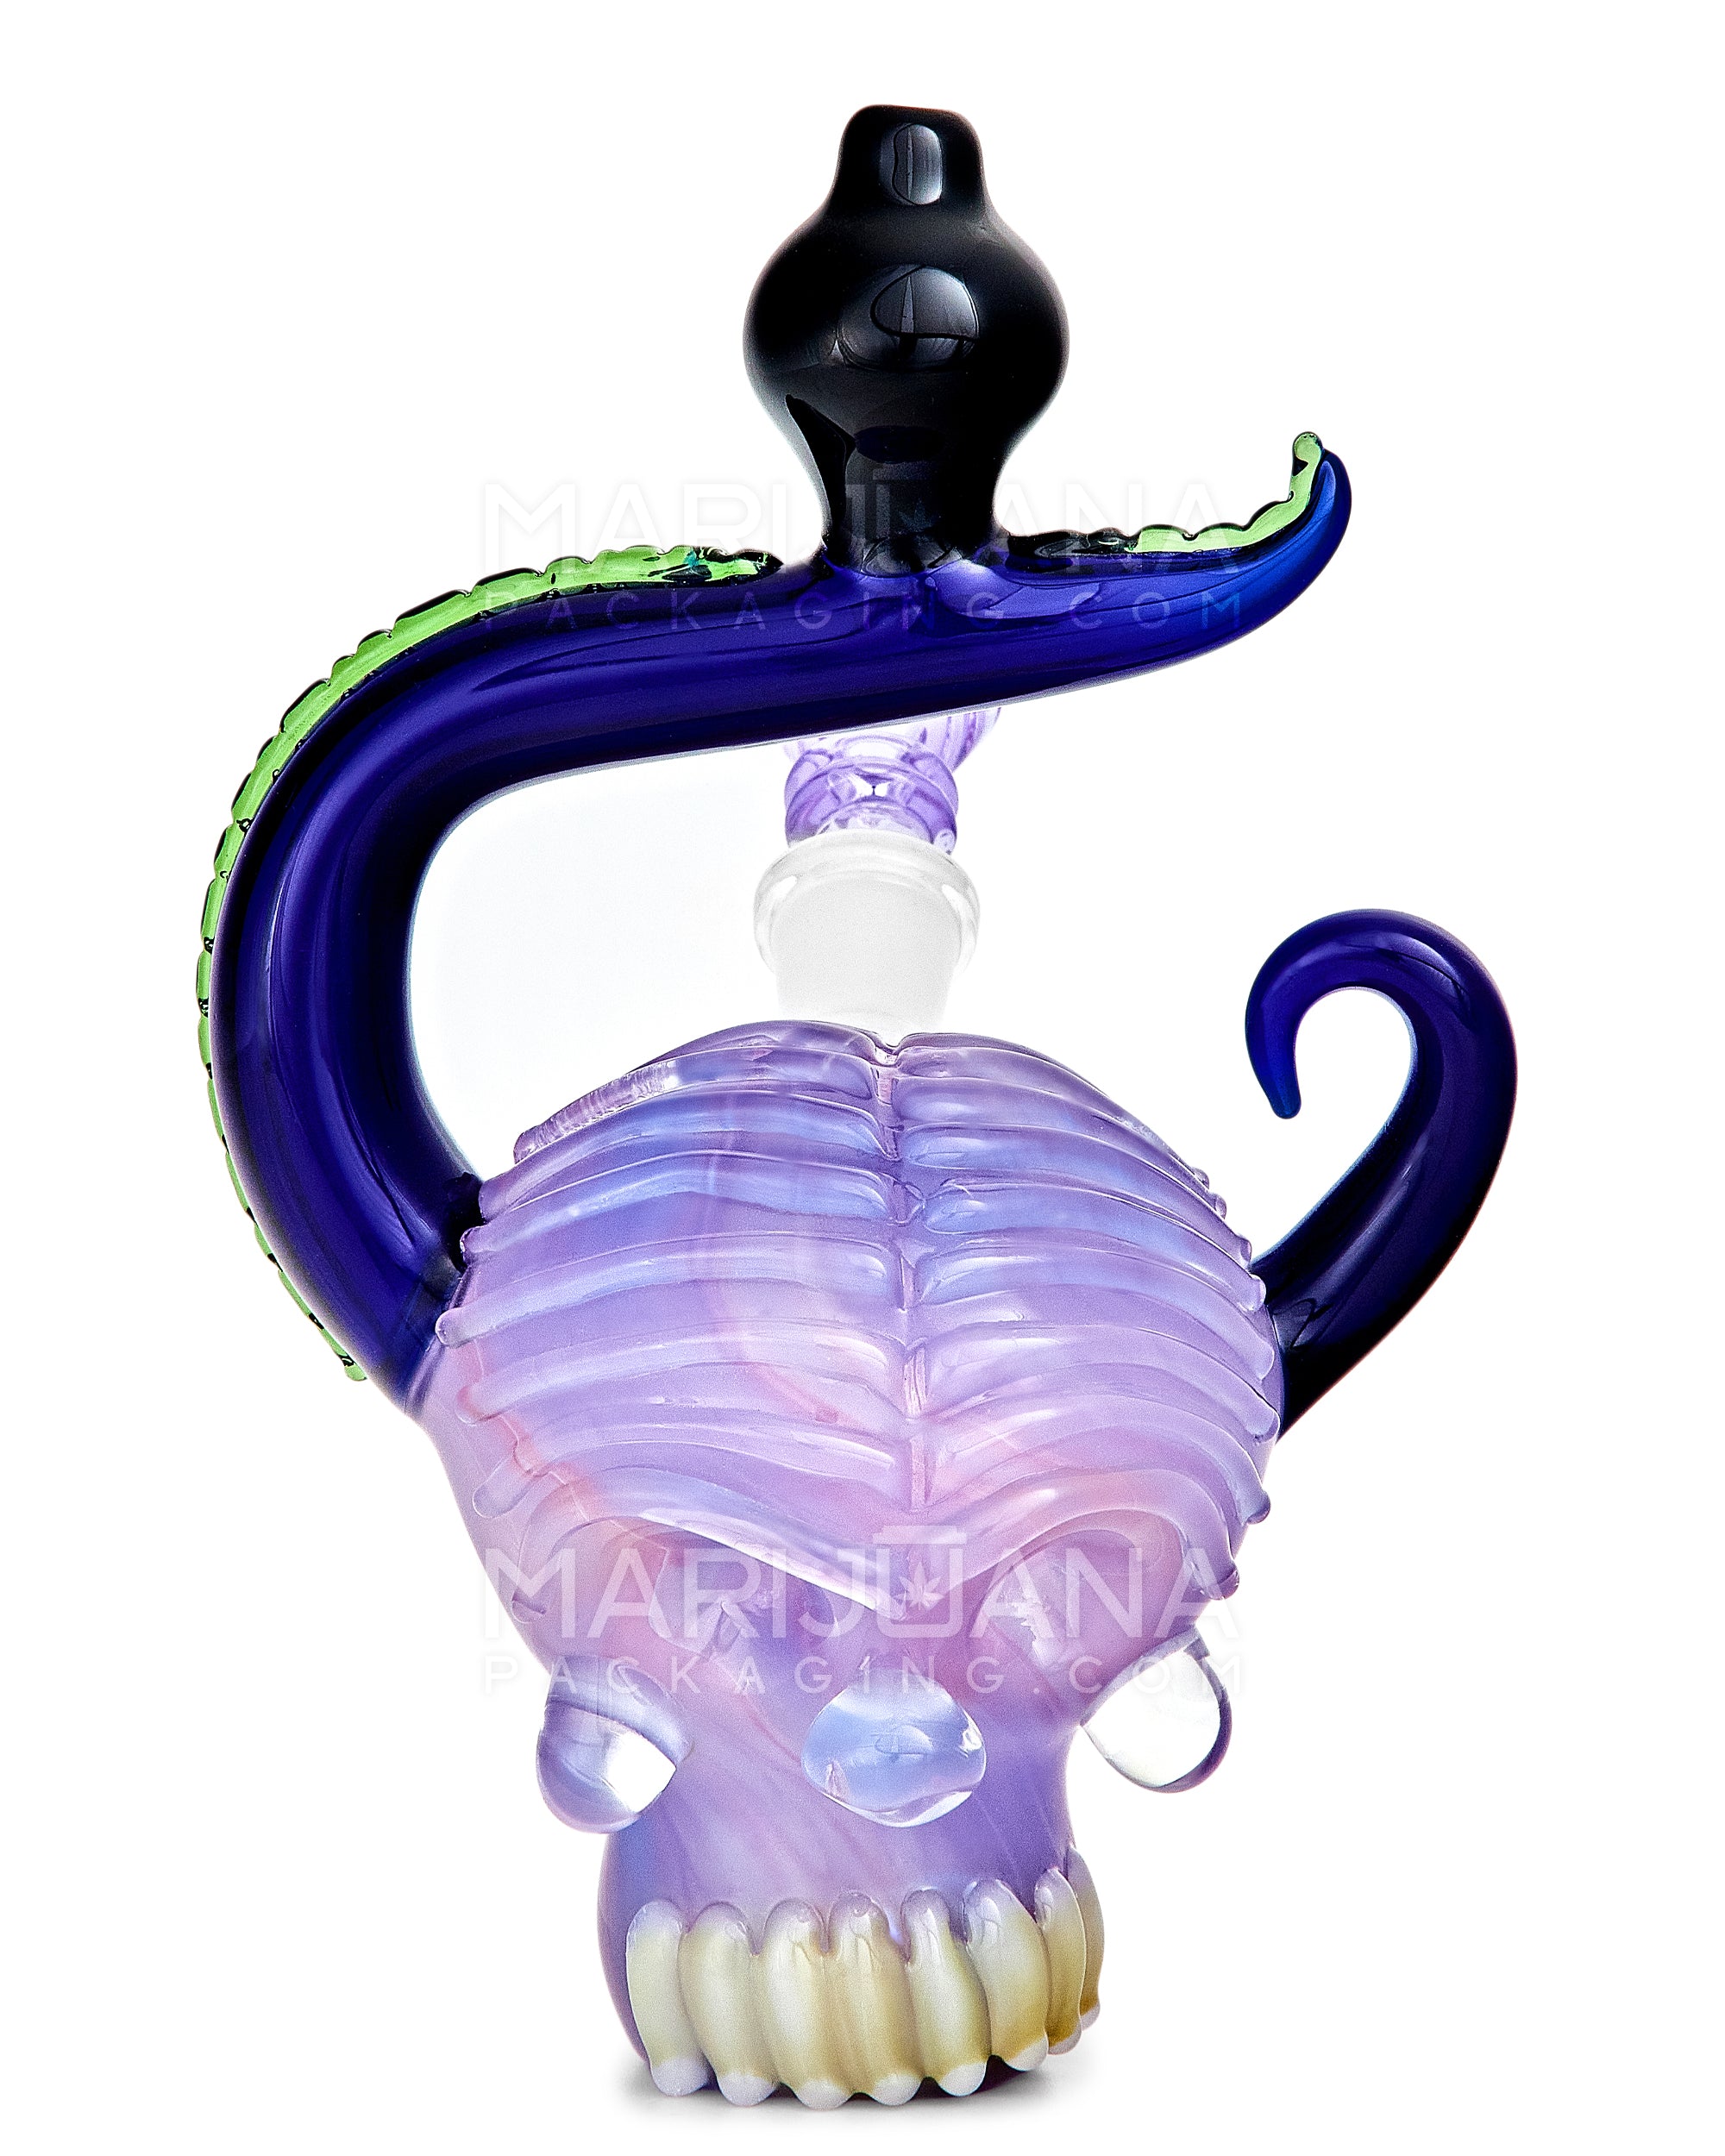 Heady | Lantern Neck Crystal Skull Head Glass Water Pipe w/ Double Knockers | 7.5in Tall - 14mm Bowl - Assorted - 1